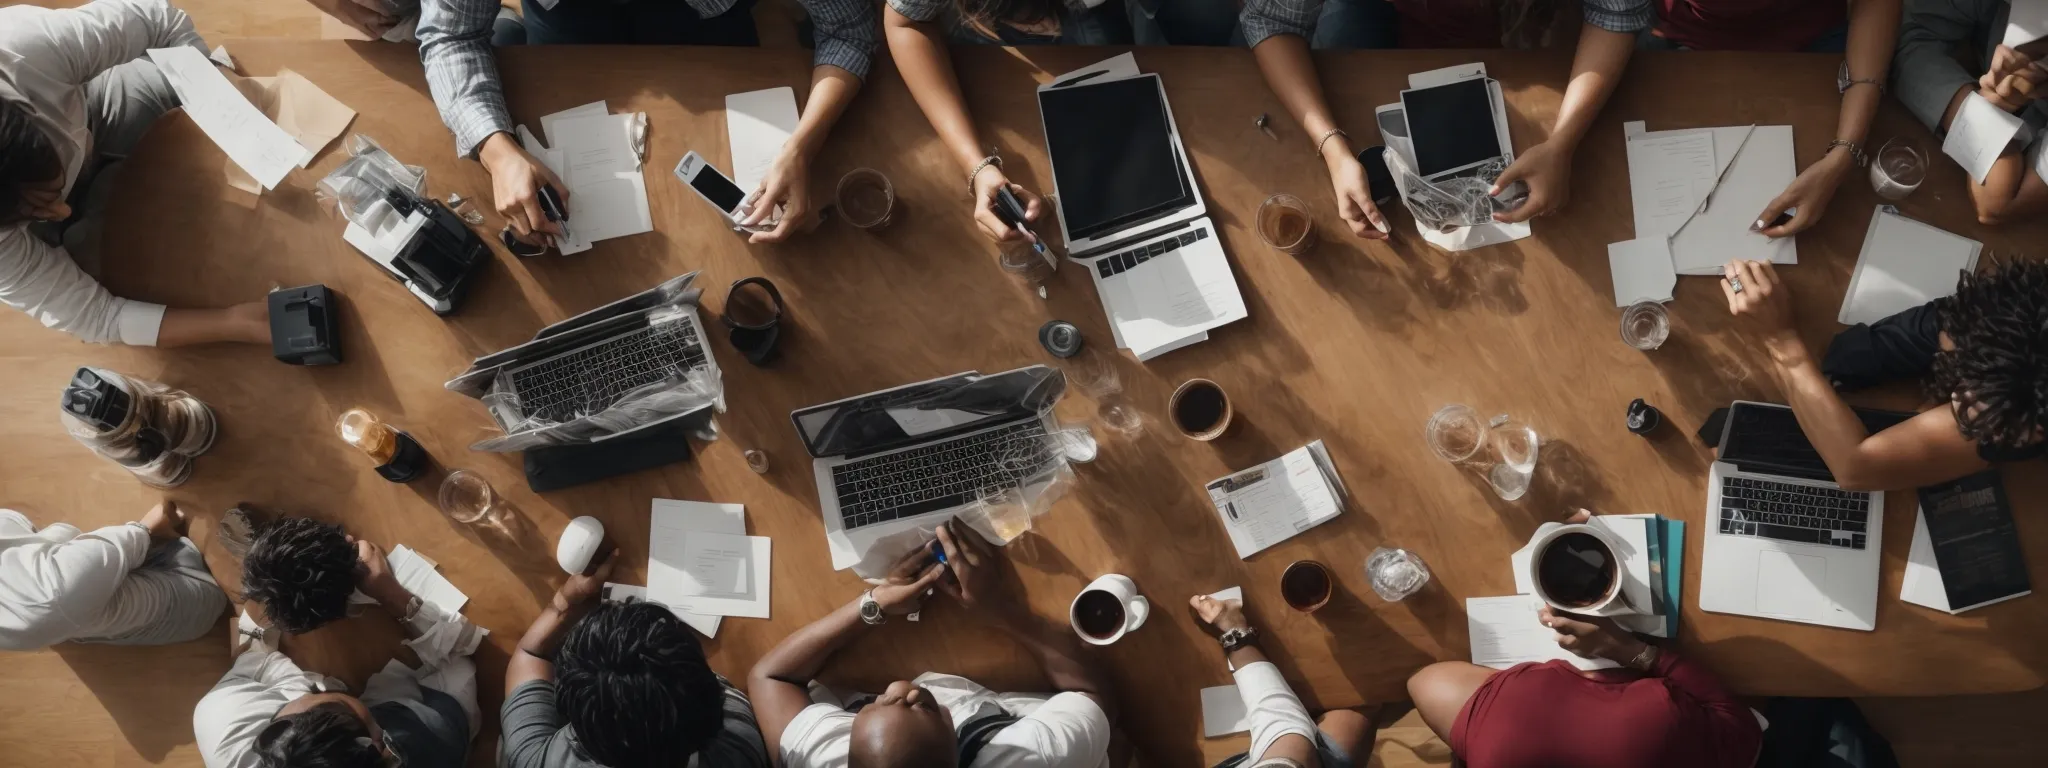 a top-down view of a diverse team engaged in an energetic brainstorming session around a table strewn with digital devices and marketing materials.